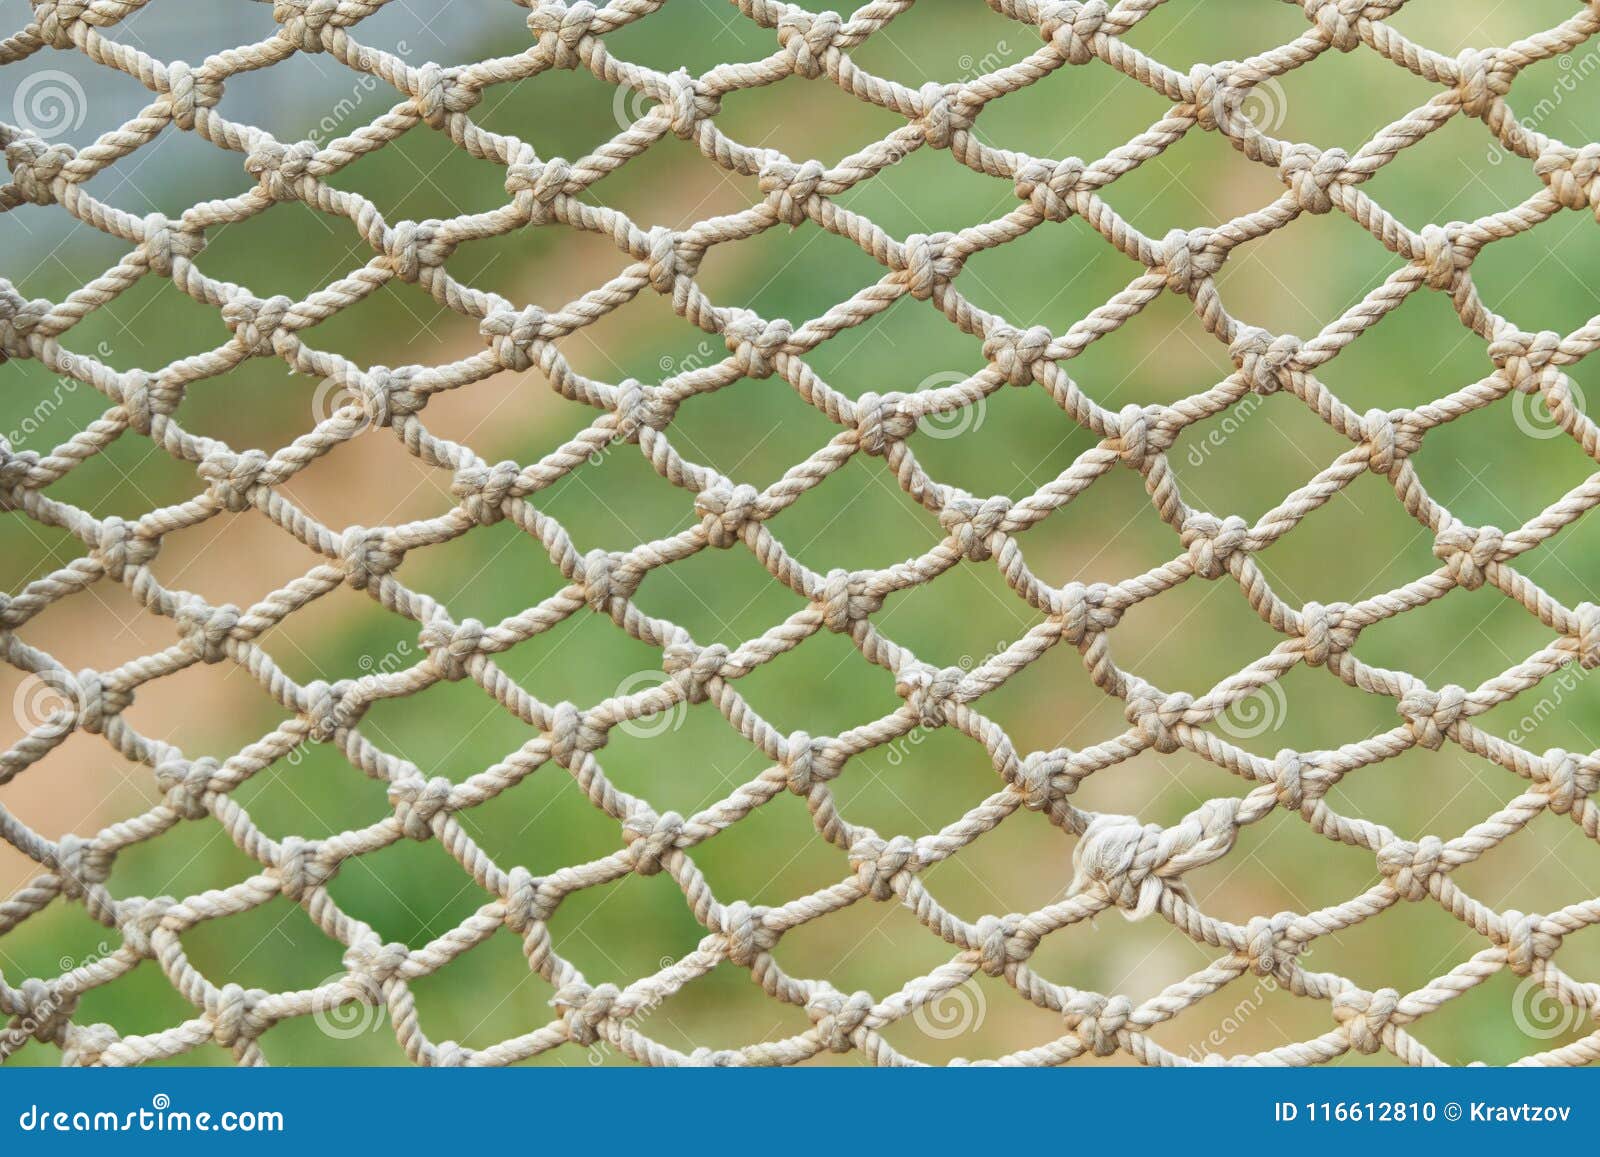 White Vintage Rope Net Texture is on Green Grass Background Stock Photo -  Image of knot, blue: 116612810